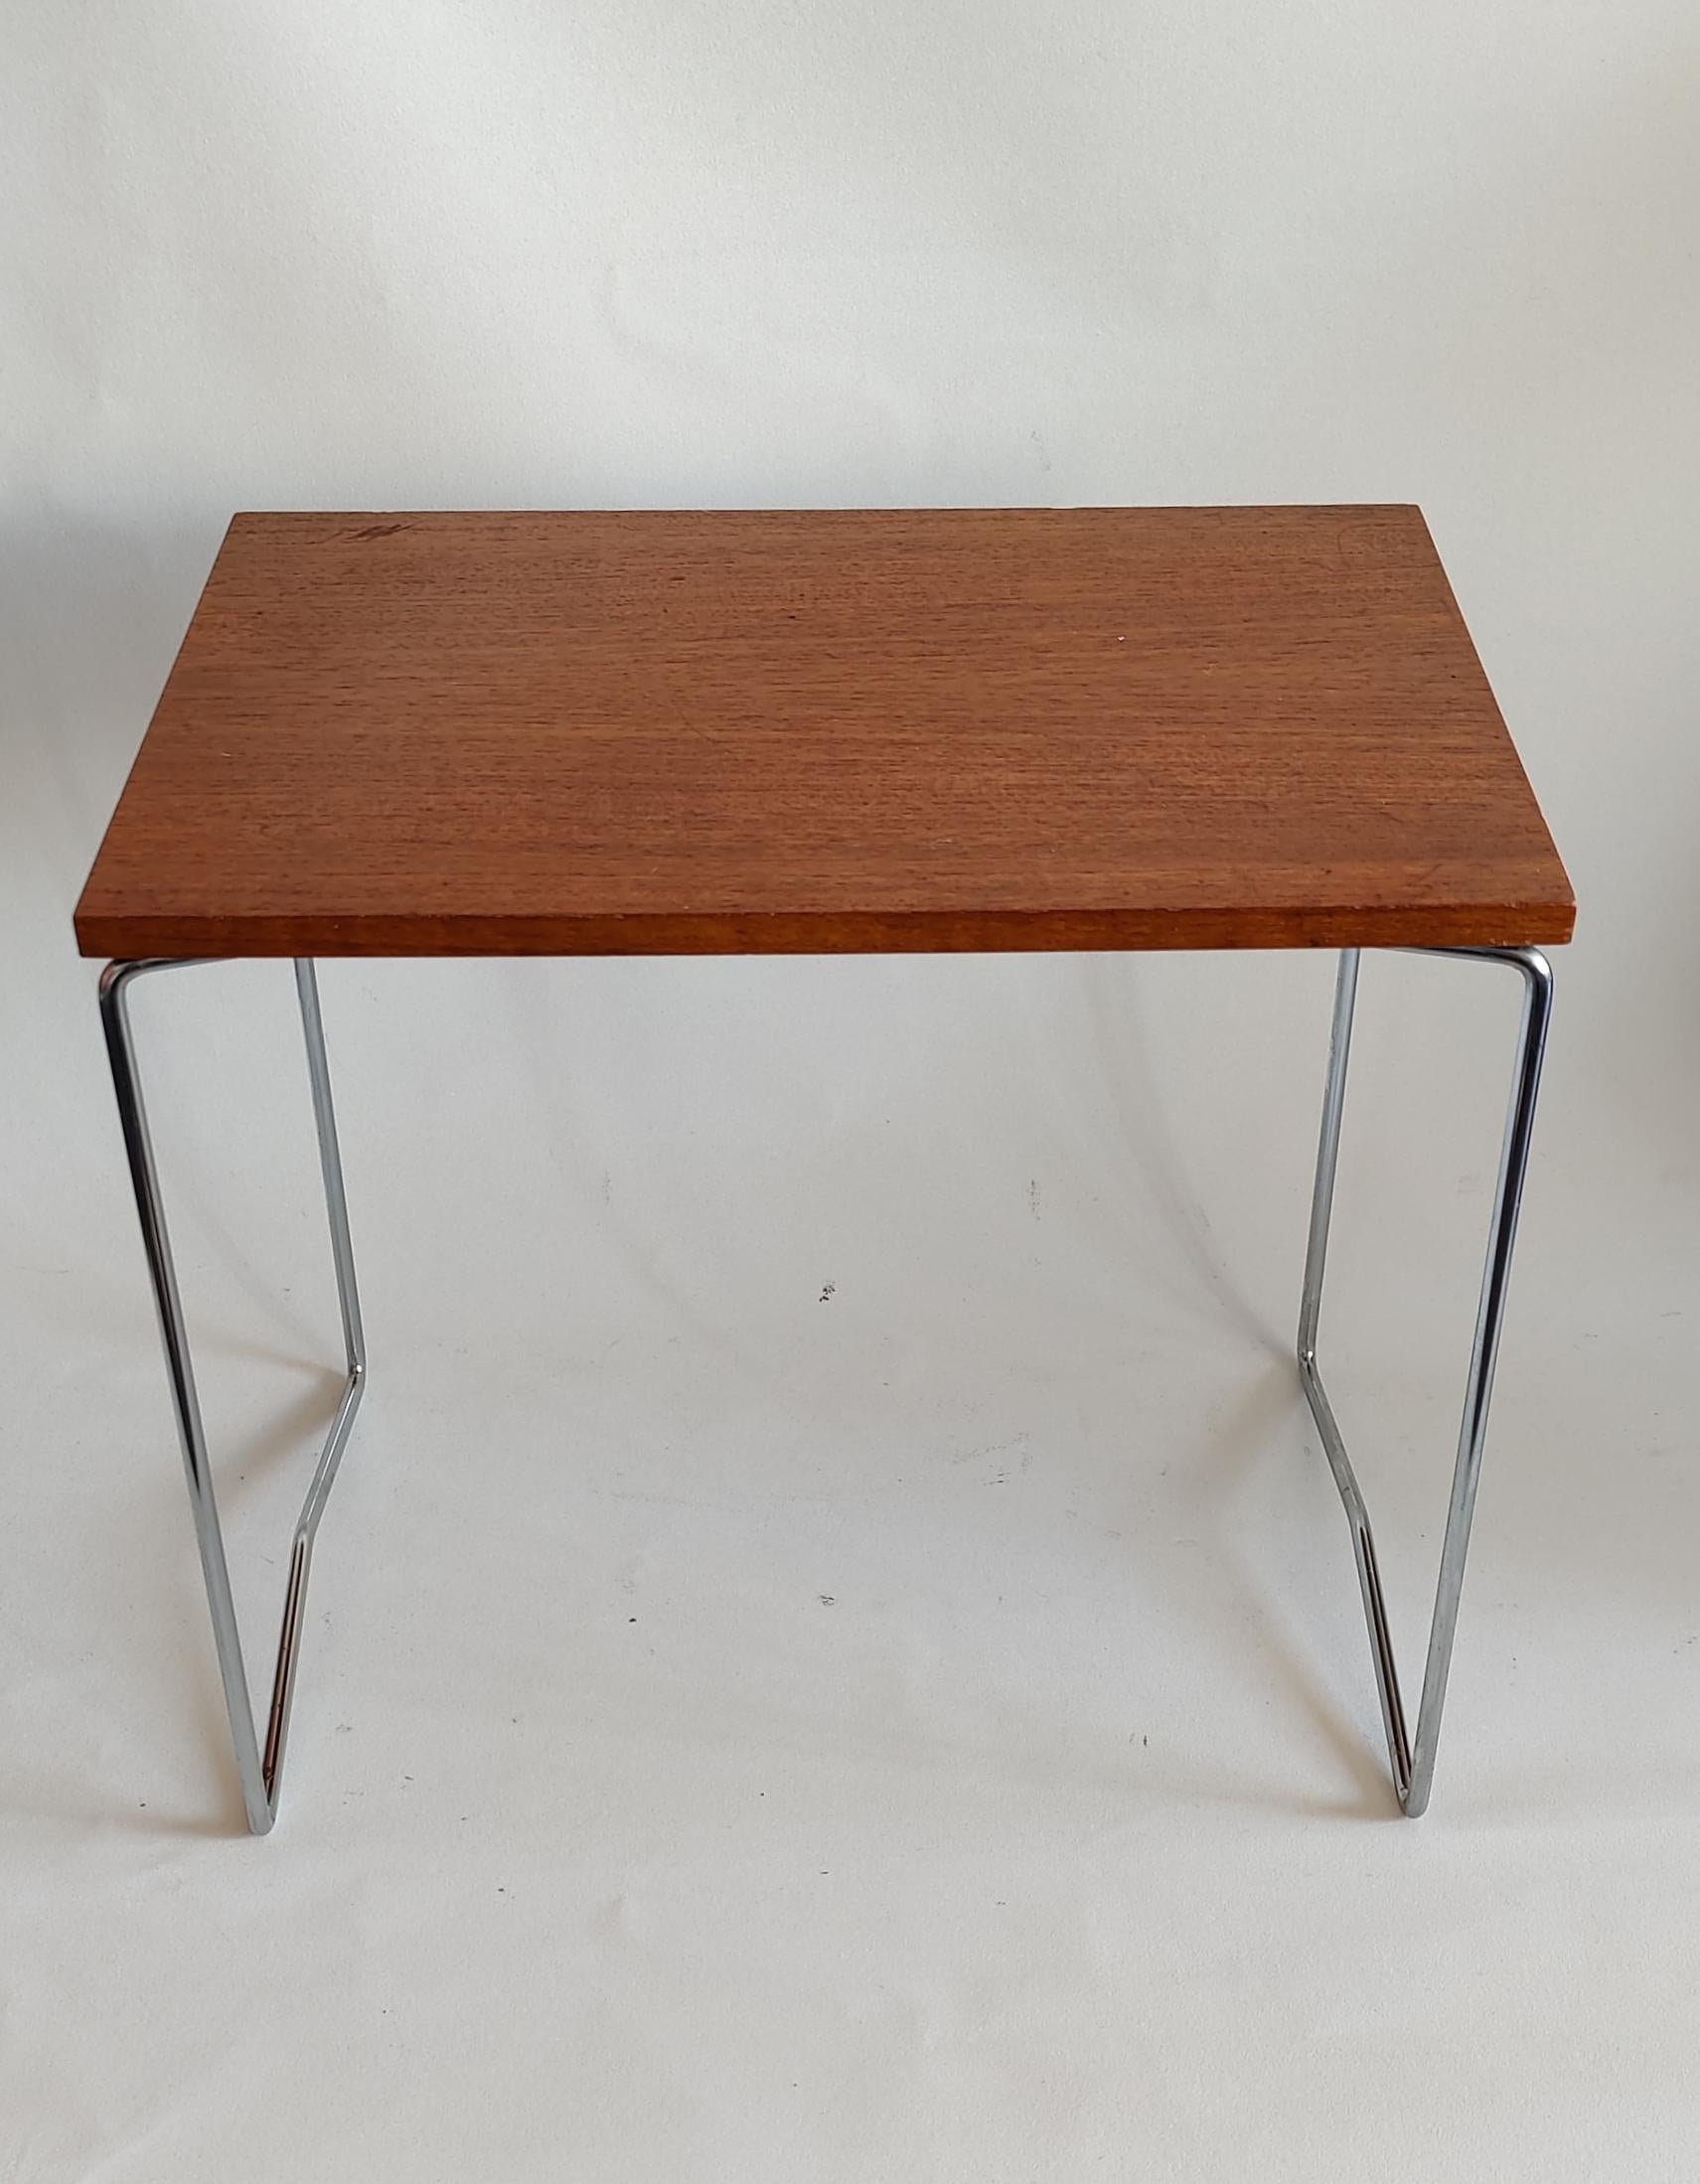 20th Century Vintage Dutch Nesting Tables by Brabantia, 1960’s For Sale